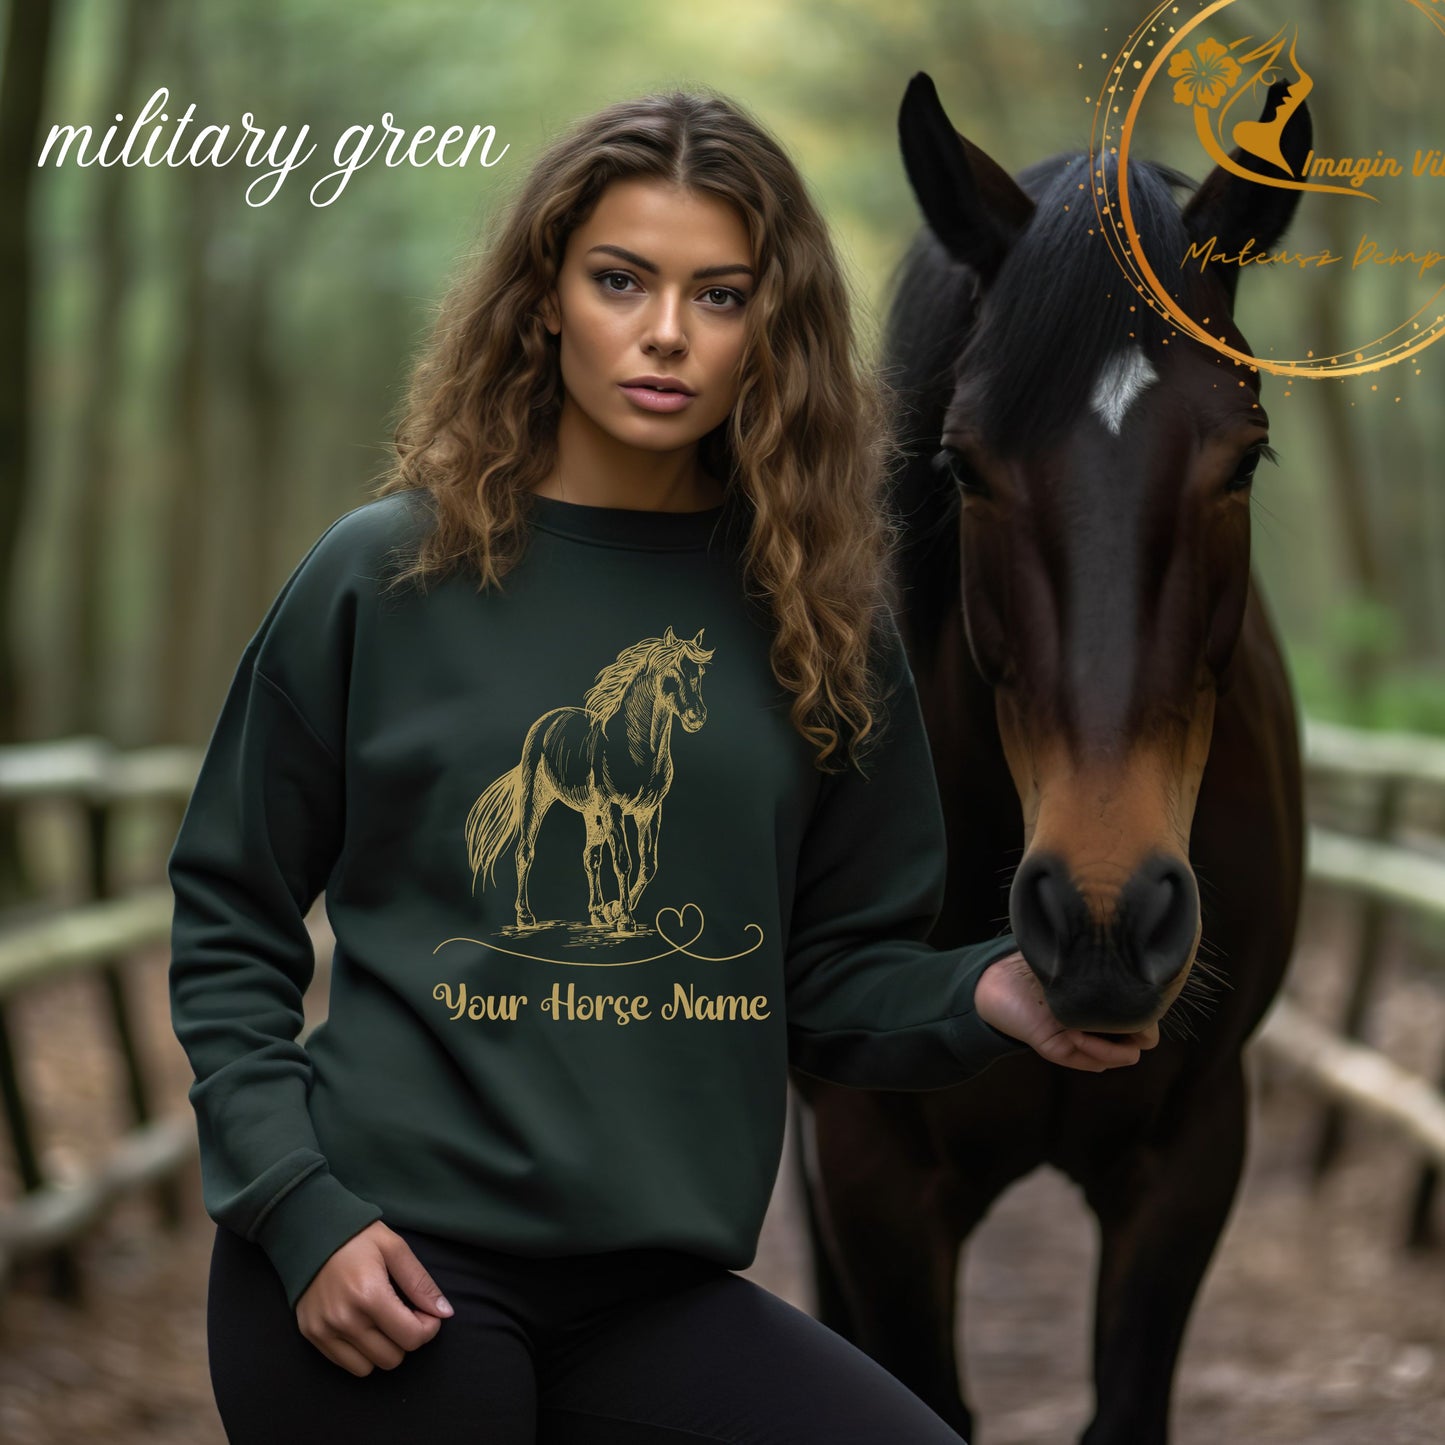 Personalized Horse Sweatshirt - Gift for Horse Owner, Perfect for Christmas, Birthdays, and Equestrian Enthusiasts Sweatshirt   